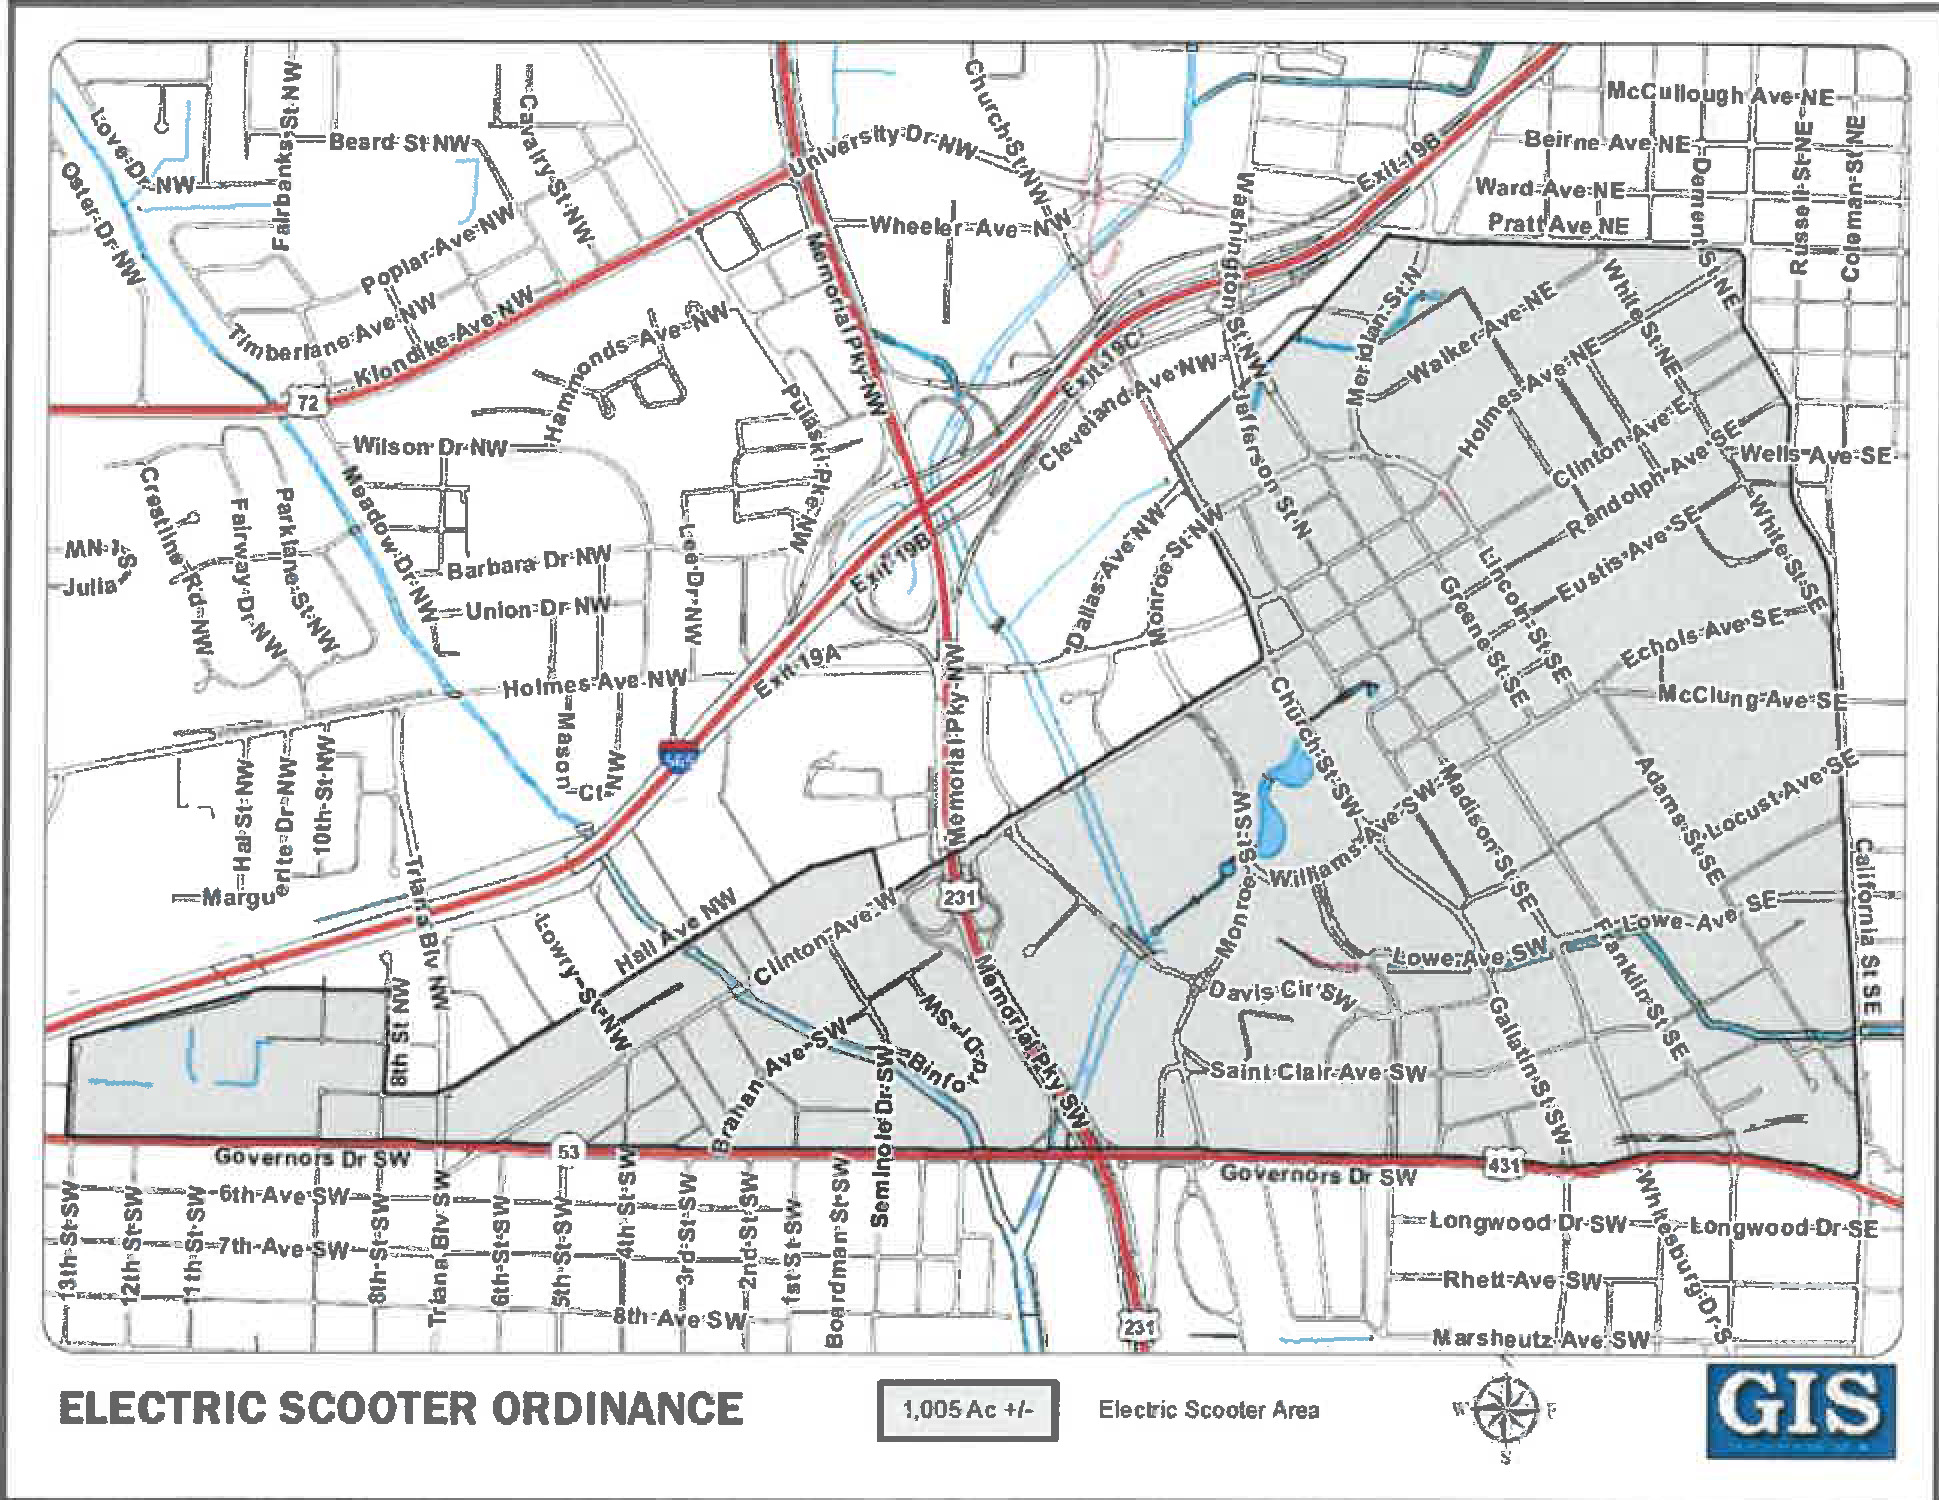 map of area downtown where scooters will be allowed to operate